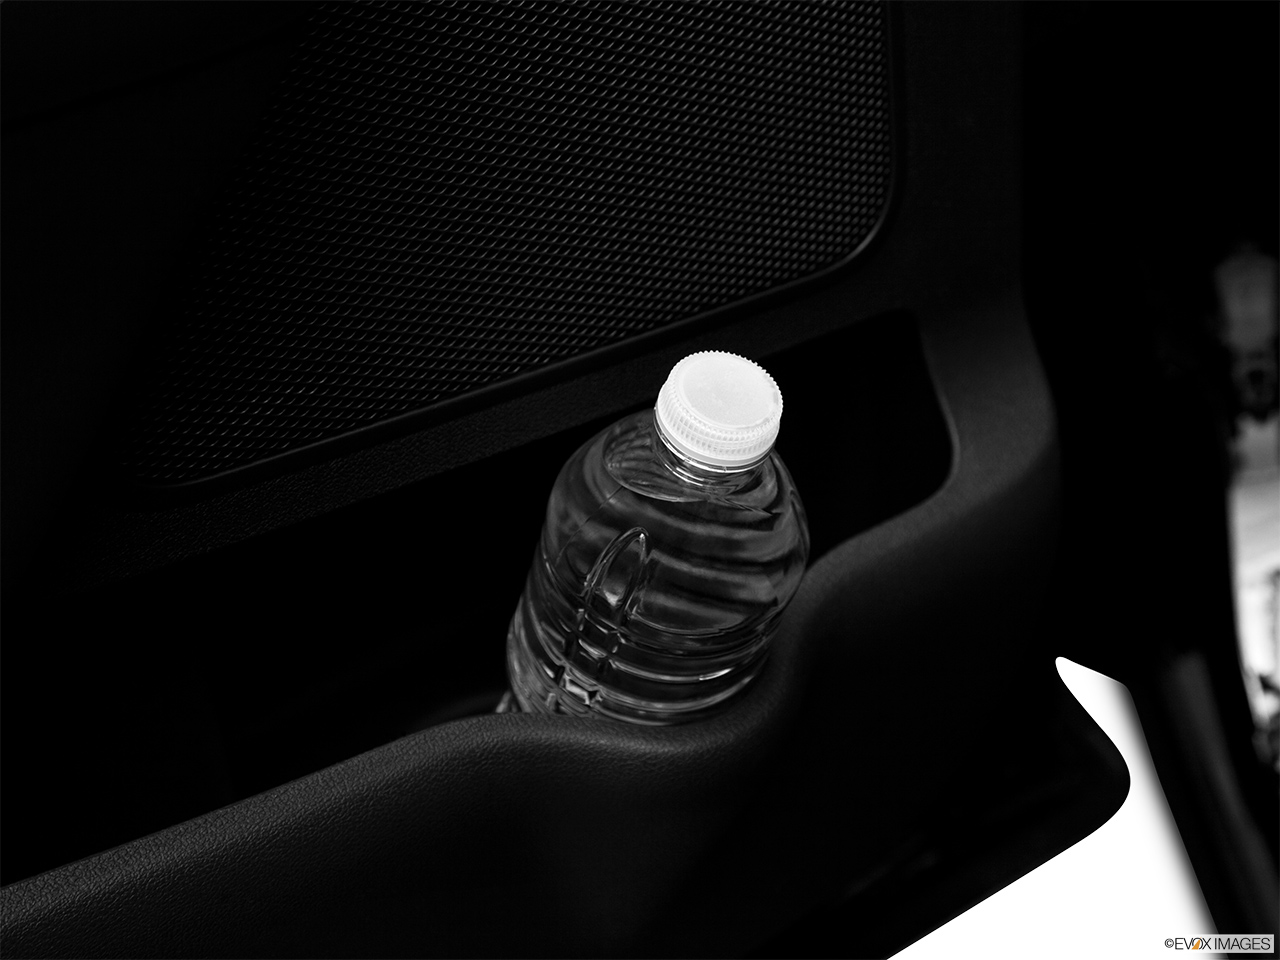 2012 Lincoln MKX FWD Second row side cup holder with coffee prop, or second row door cup holder with water bottle. 